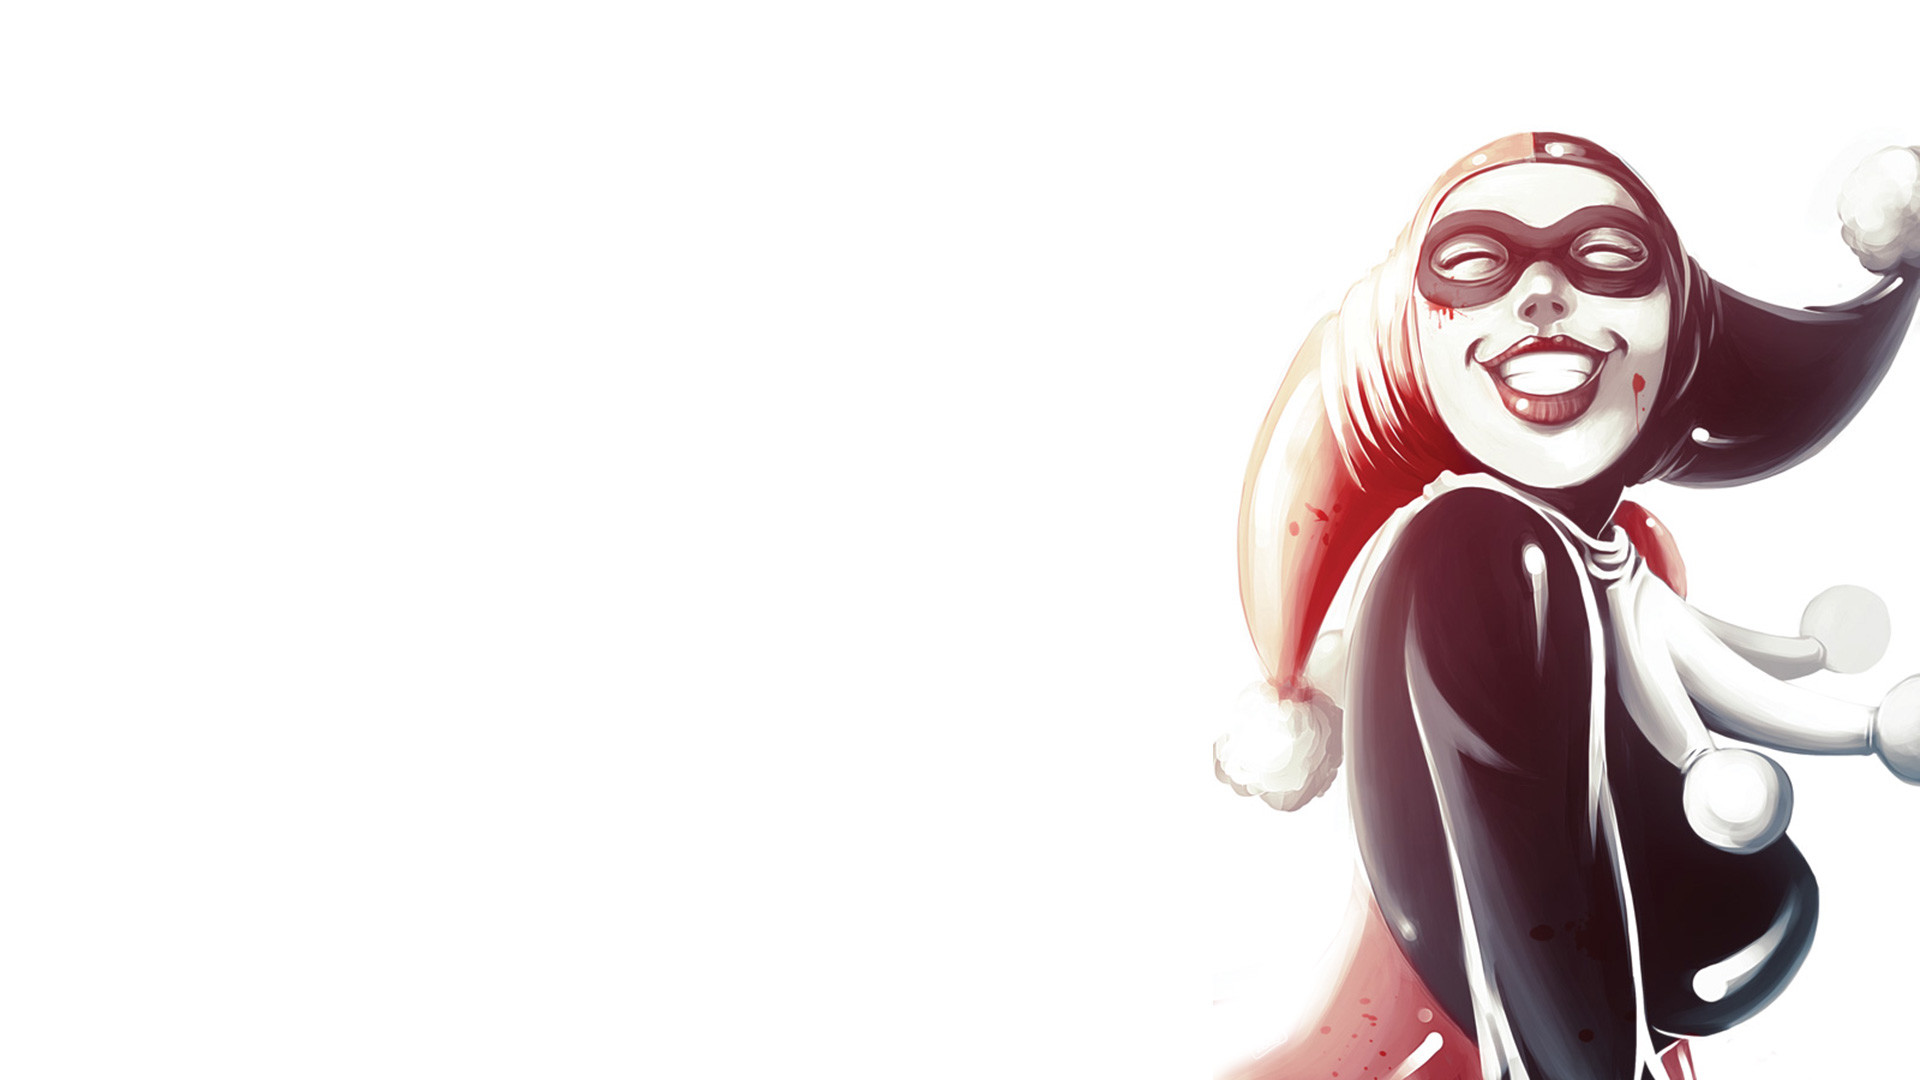 1920x1080 366 Harley Quinn HD Wallpapers | Backgrounds - Wallpaper Abyss - Page 7